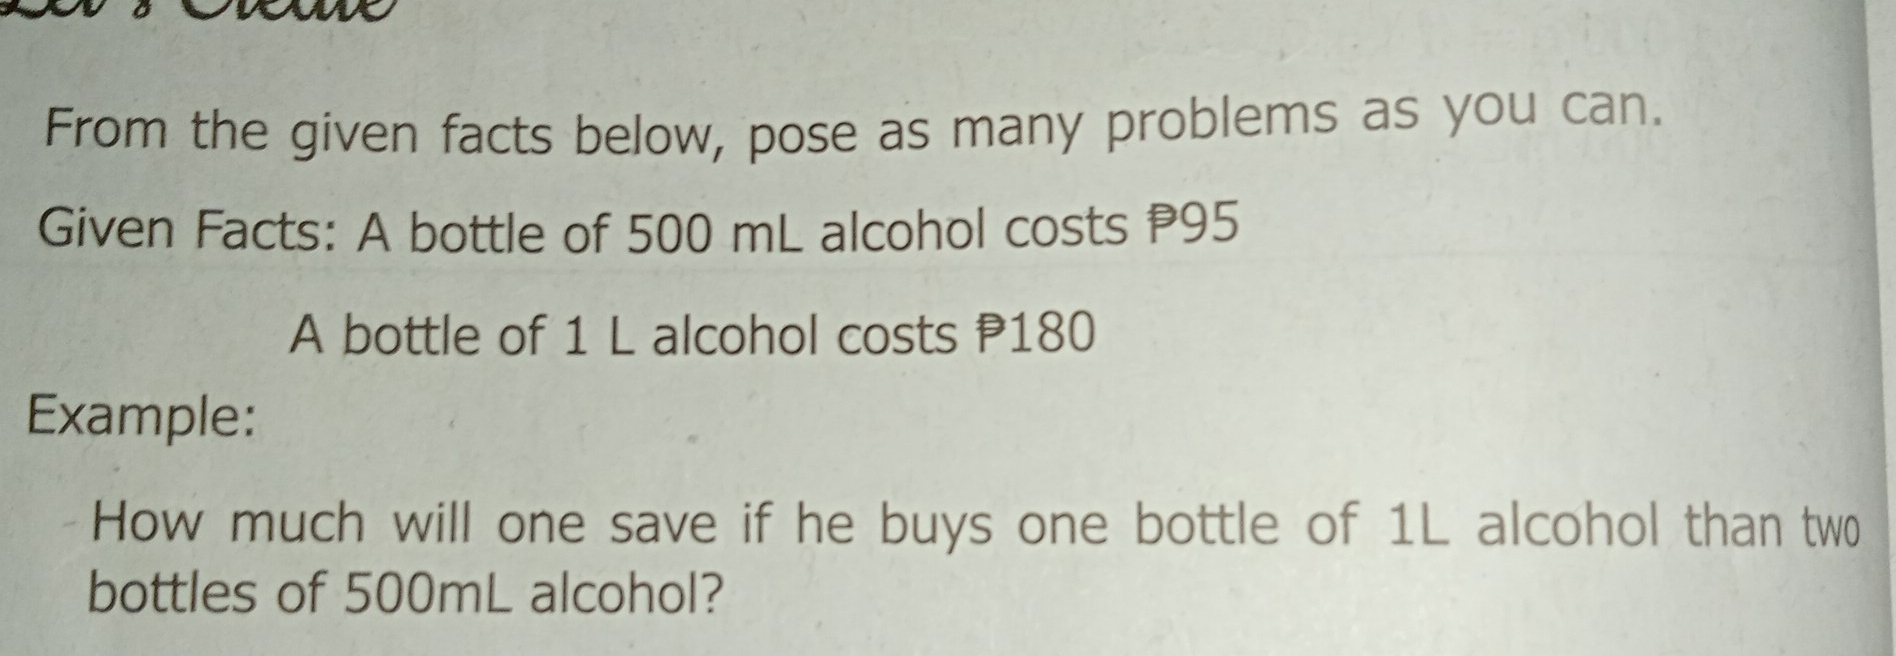 From the given facts below, pose as many problems as you can. Given Facts: A bottle of 500 mL alcohol costs P95 A bottle of 1 L alcohol costs P180 Example: How much will one save if he buys one bottle of 1L alcohol than two bottles of 500mL alcohol?